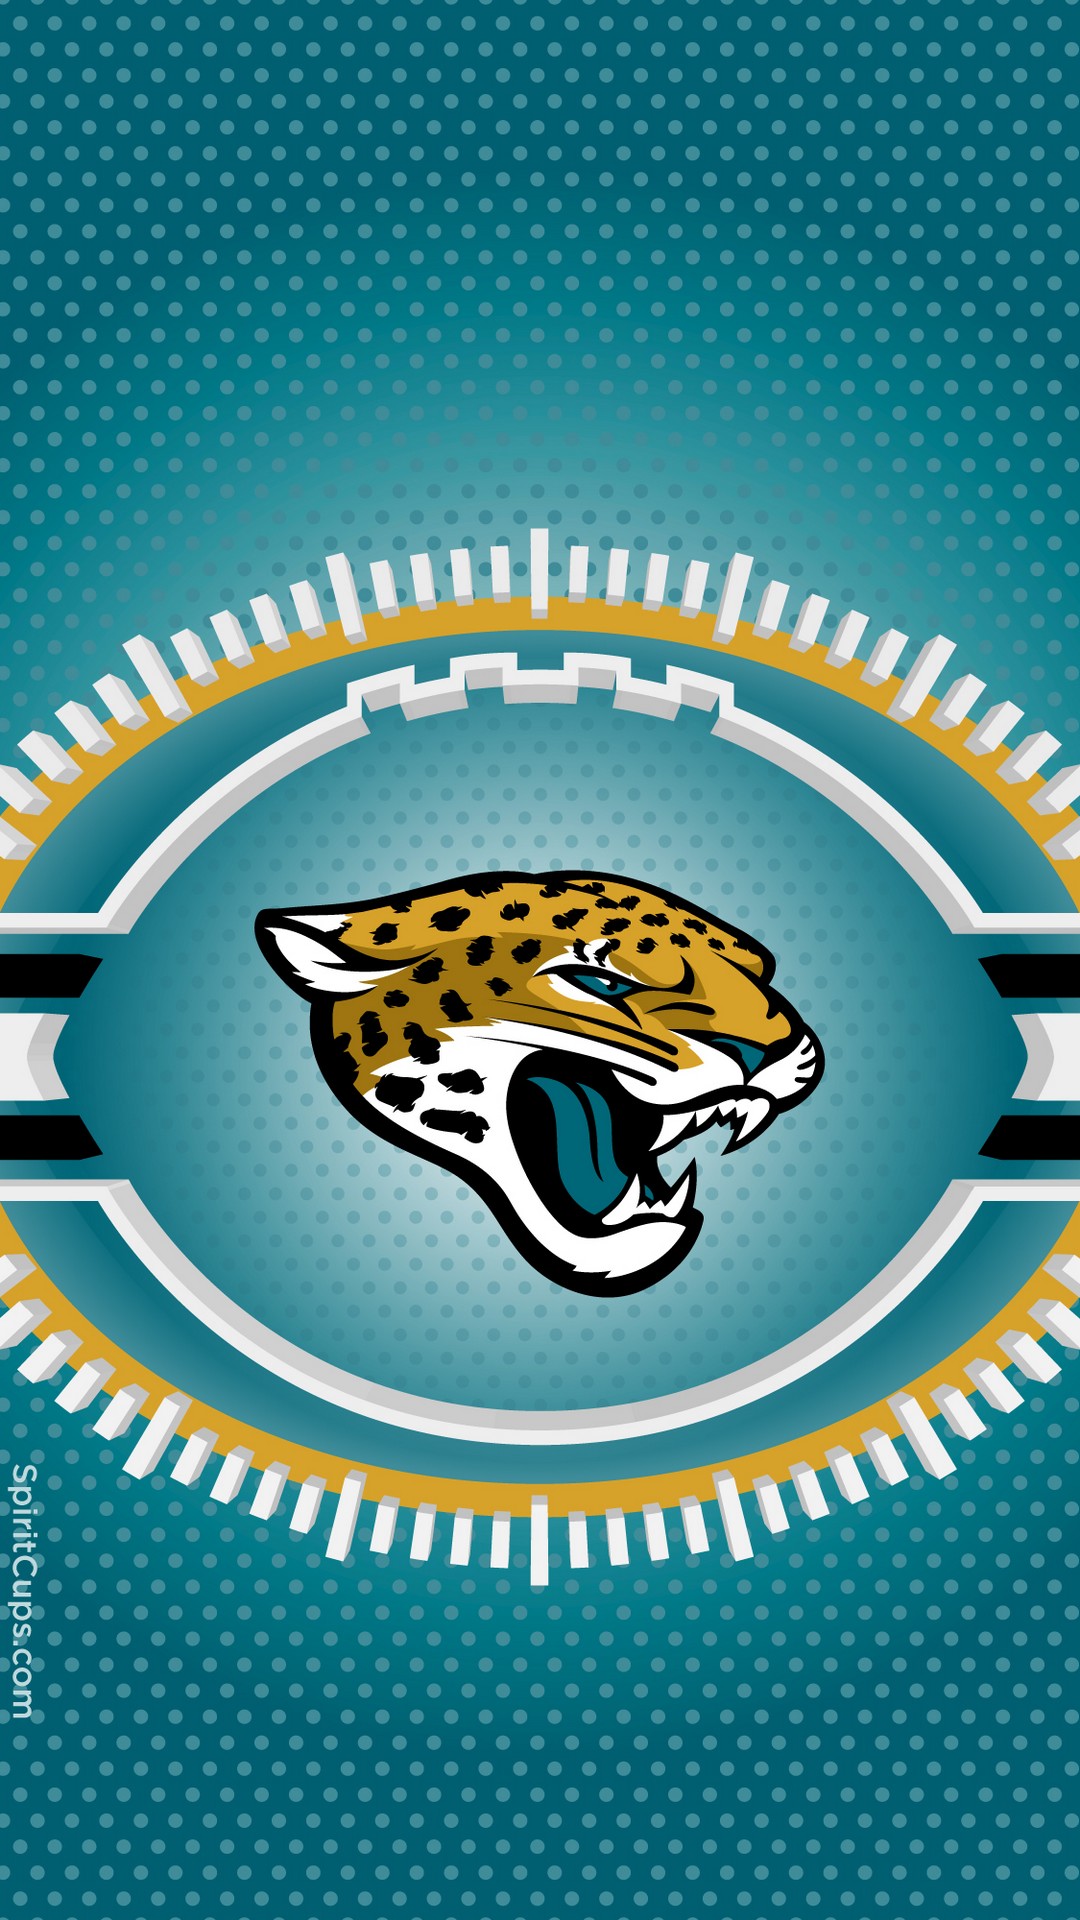 Jacksonville Jaguars iPhone Wallpapers With high-resolution 1080X1920 pixel. You can use this wallpaper for your Mac or Windows Desktop Background, iPhone, Android or Tablet and another Smartphone device